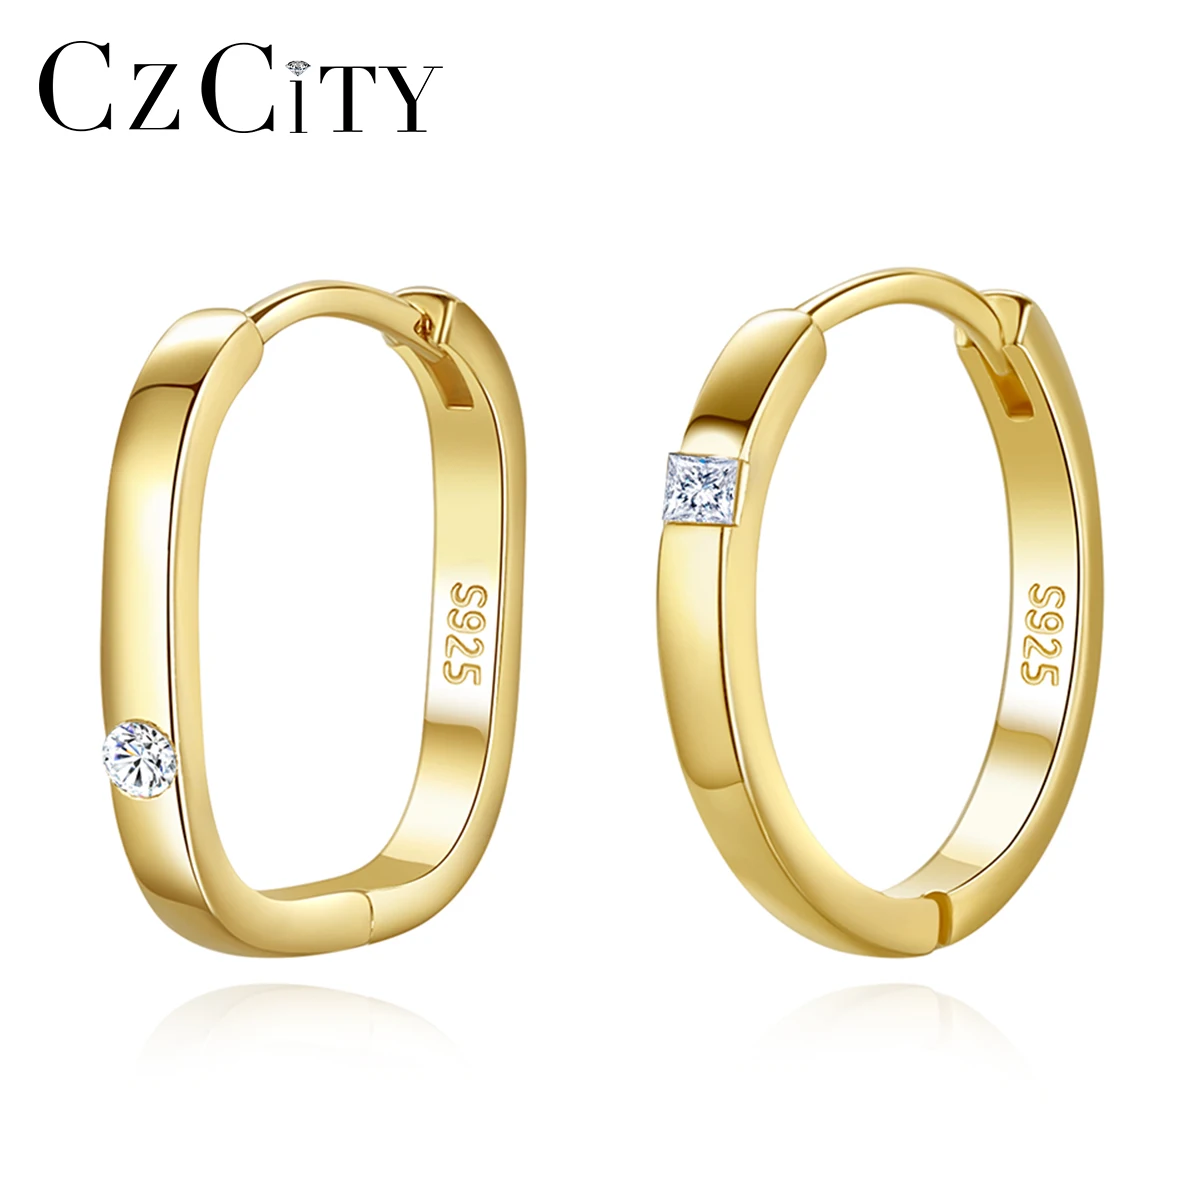 

CZCITY Genuine 925 Sterling Silver Classic Round Circle Round Square Clear CZ Hoop Earrings for Women Wedding Engagement Jewelry